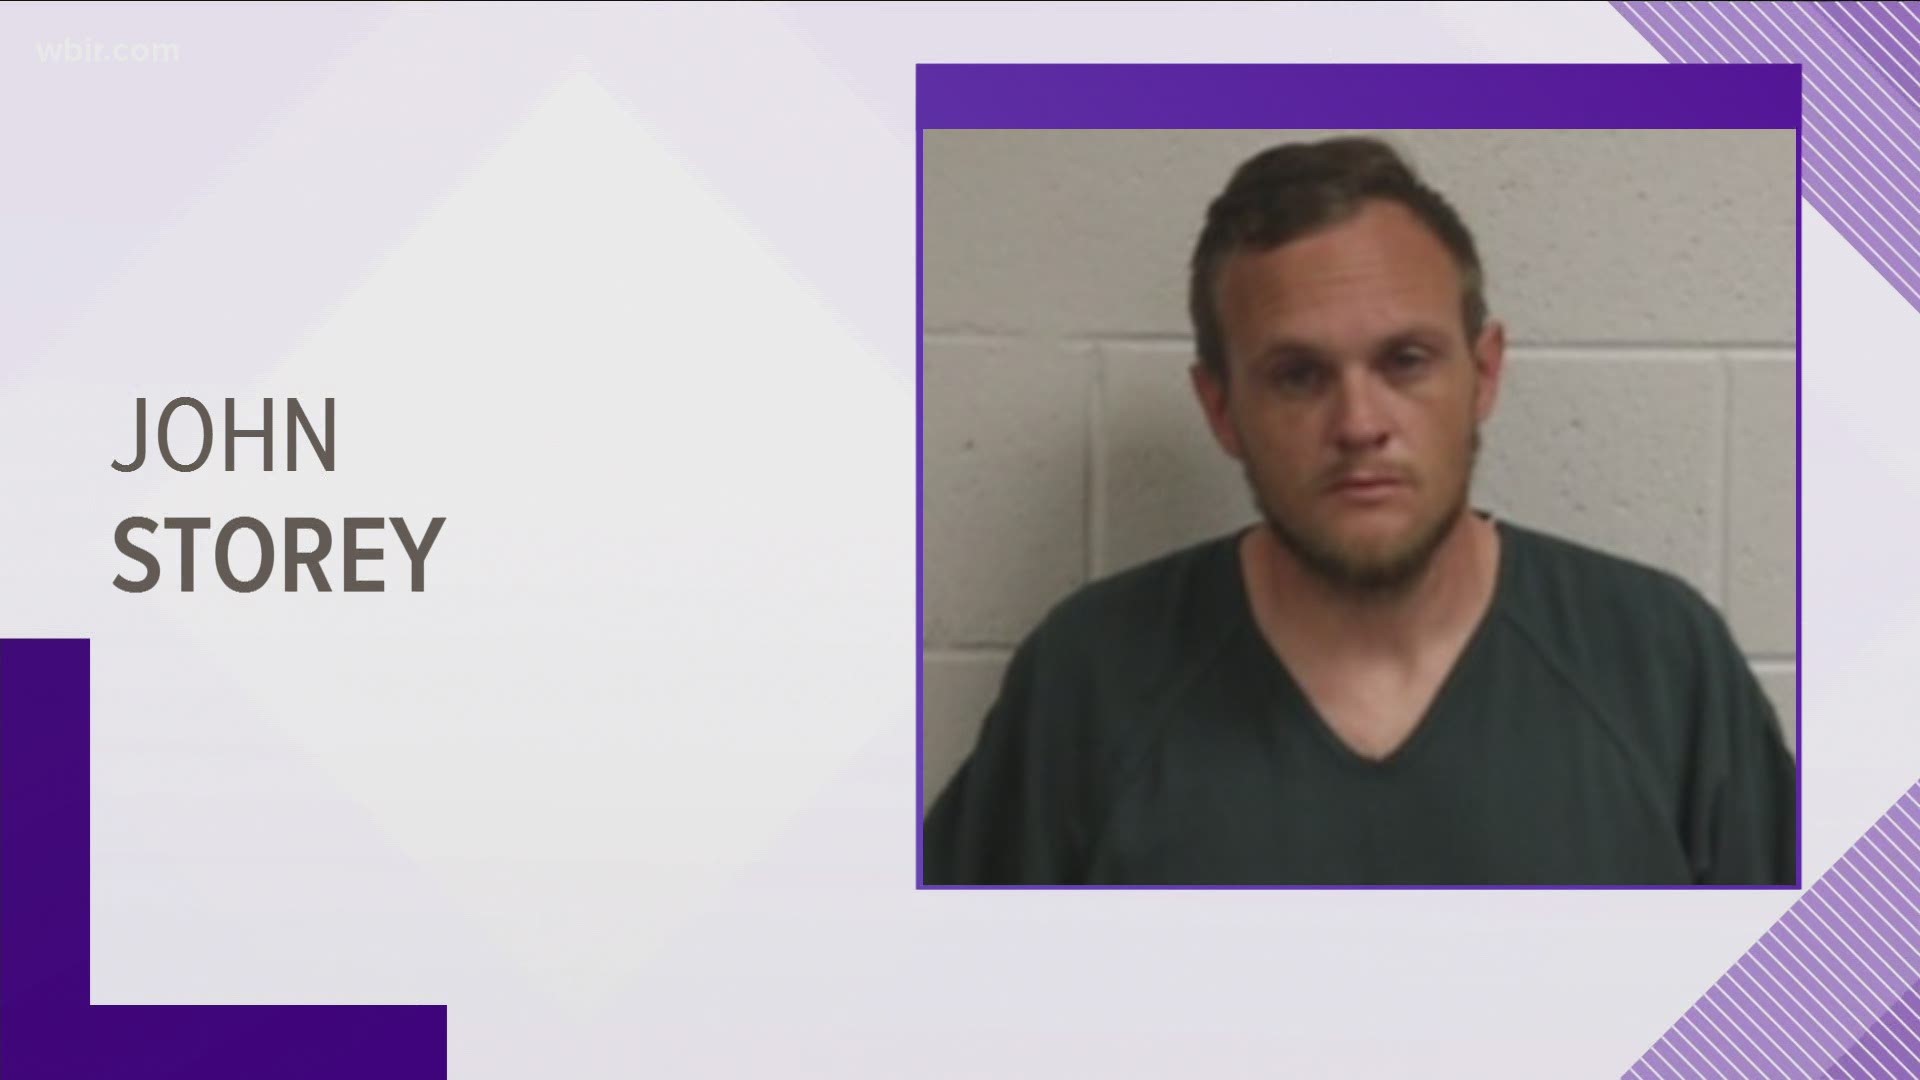 Authorities say Kent Blackwell died of an overdose in a LaFollette restaurant in December. The TBI says 31-year-old John Storey gave the drugs to Blackwell.